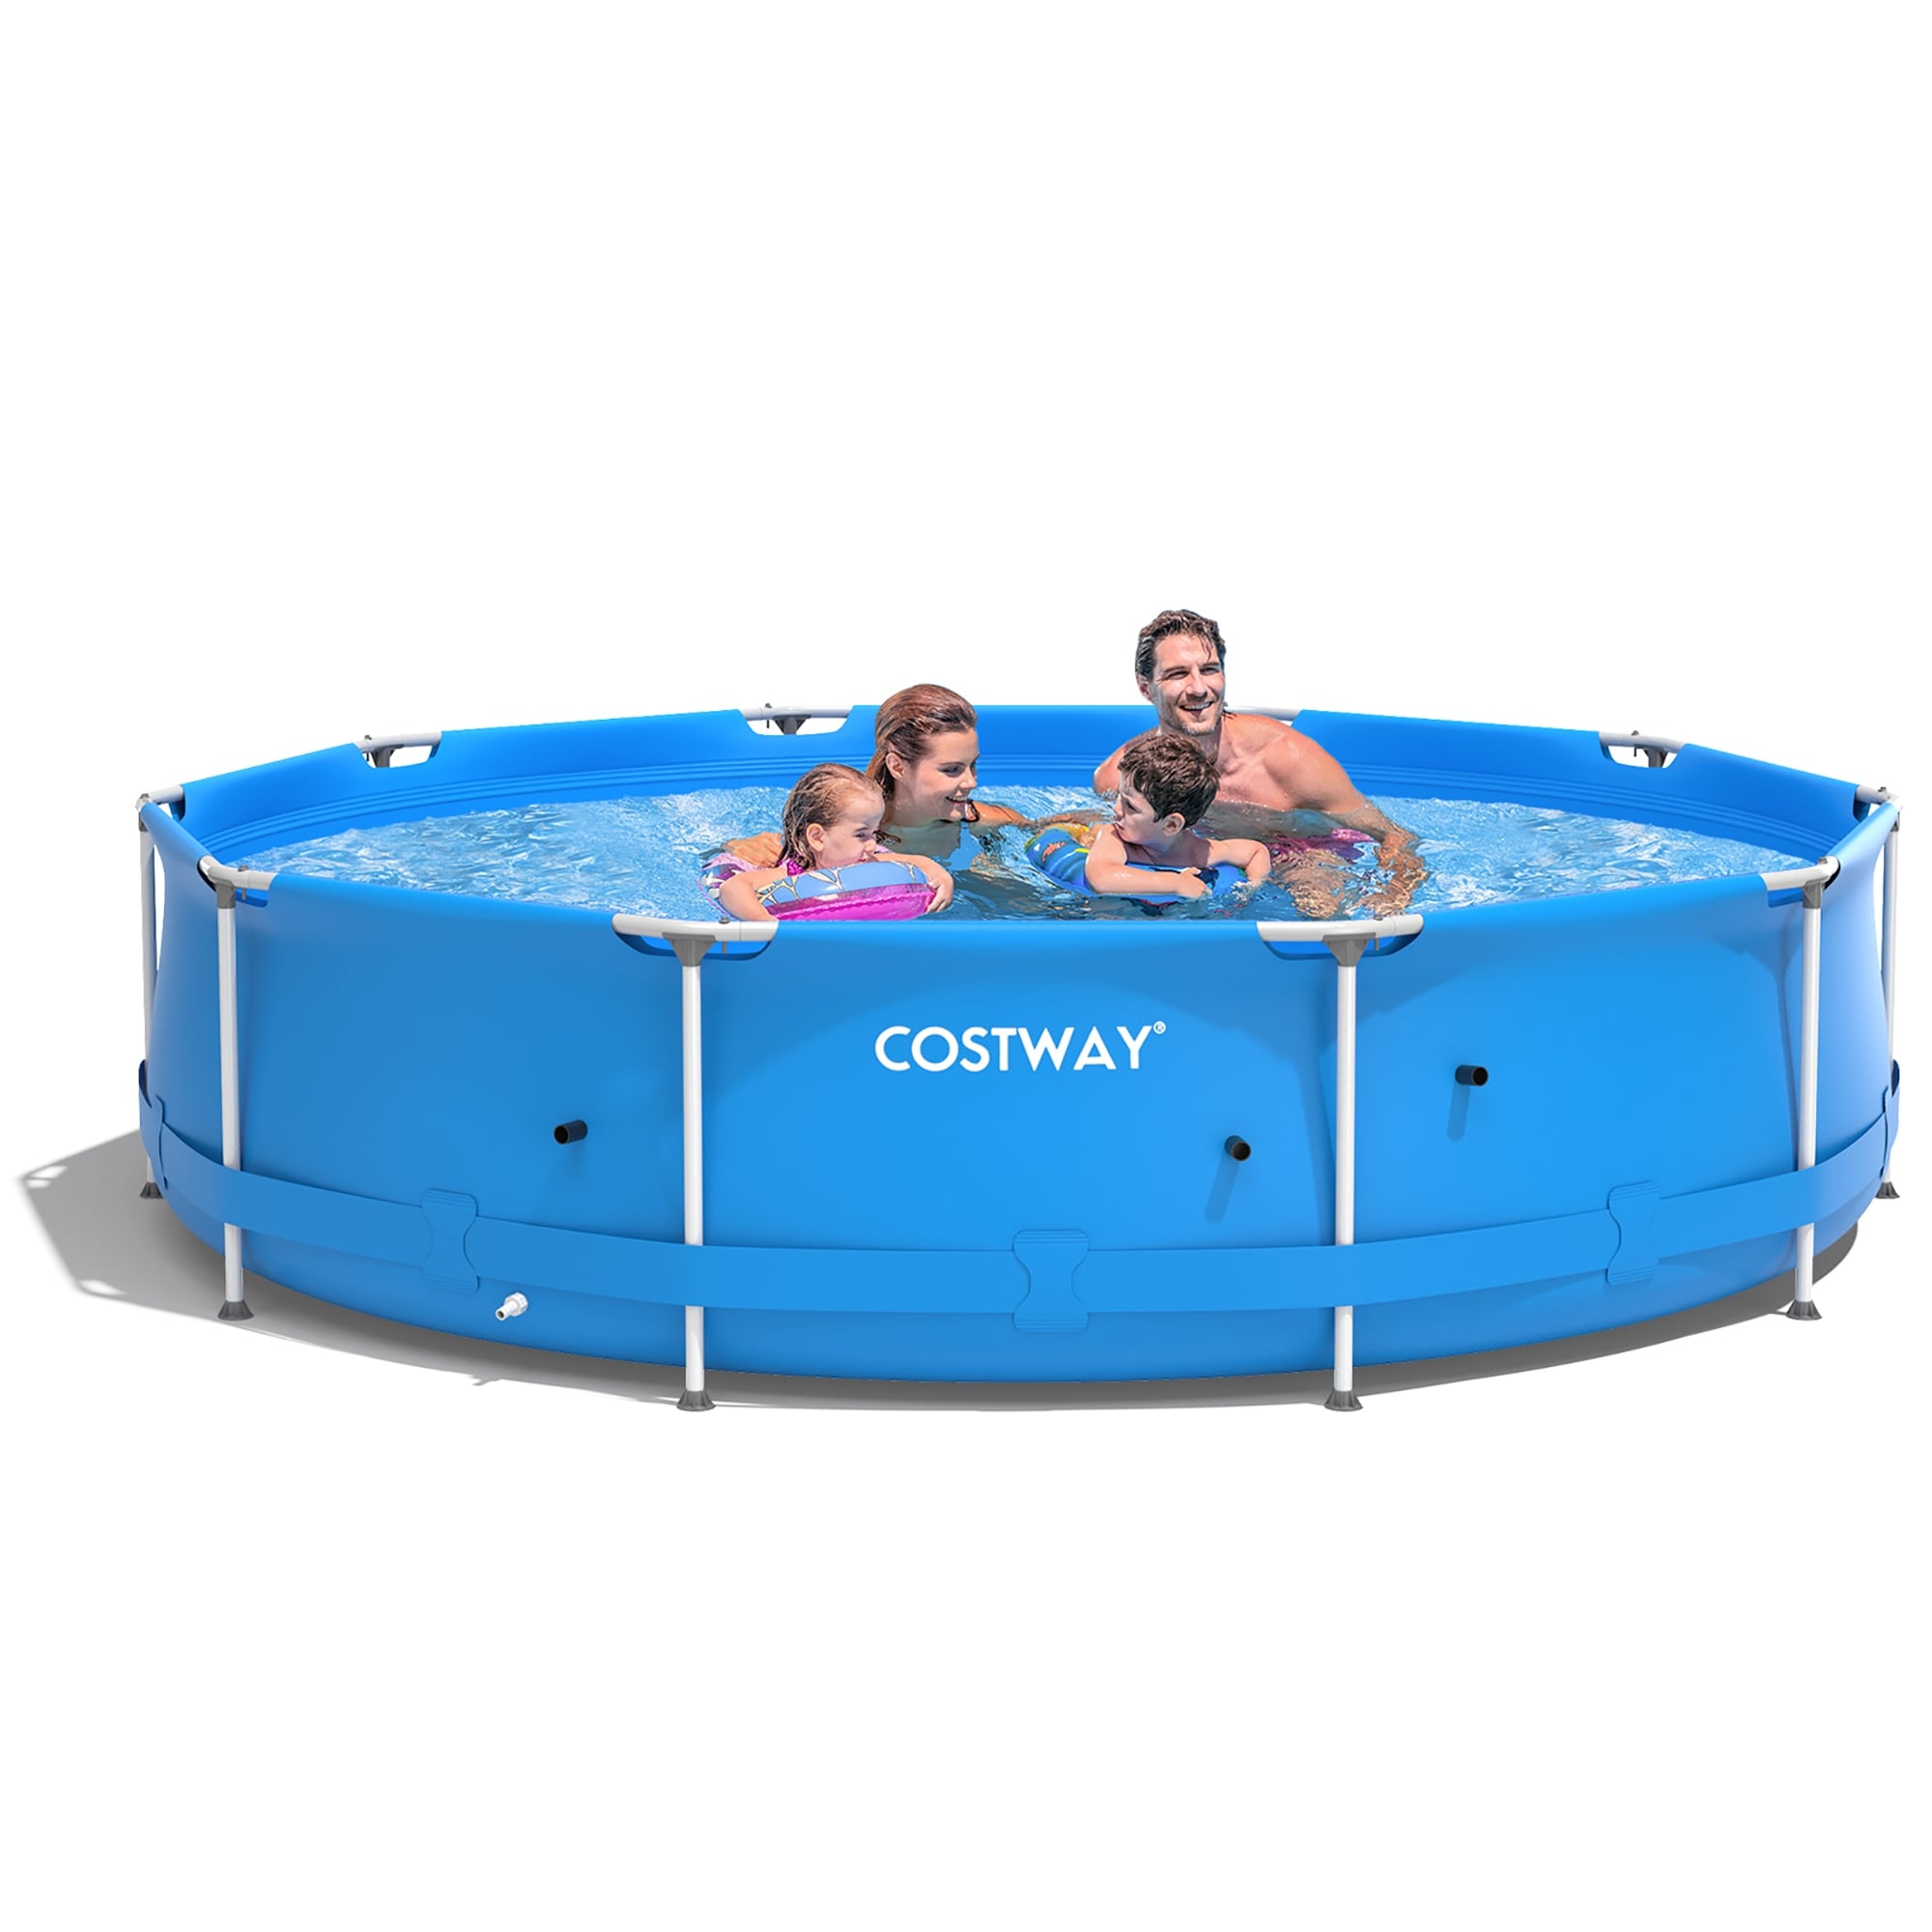 COSTWAY 8 ft x 30 inch Easy-Set Giant Inflatable above Ground Swimming Pool 